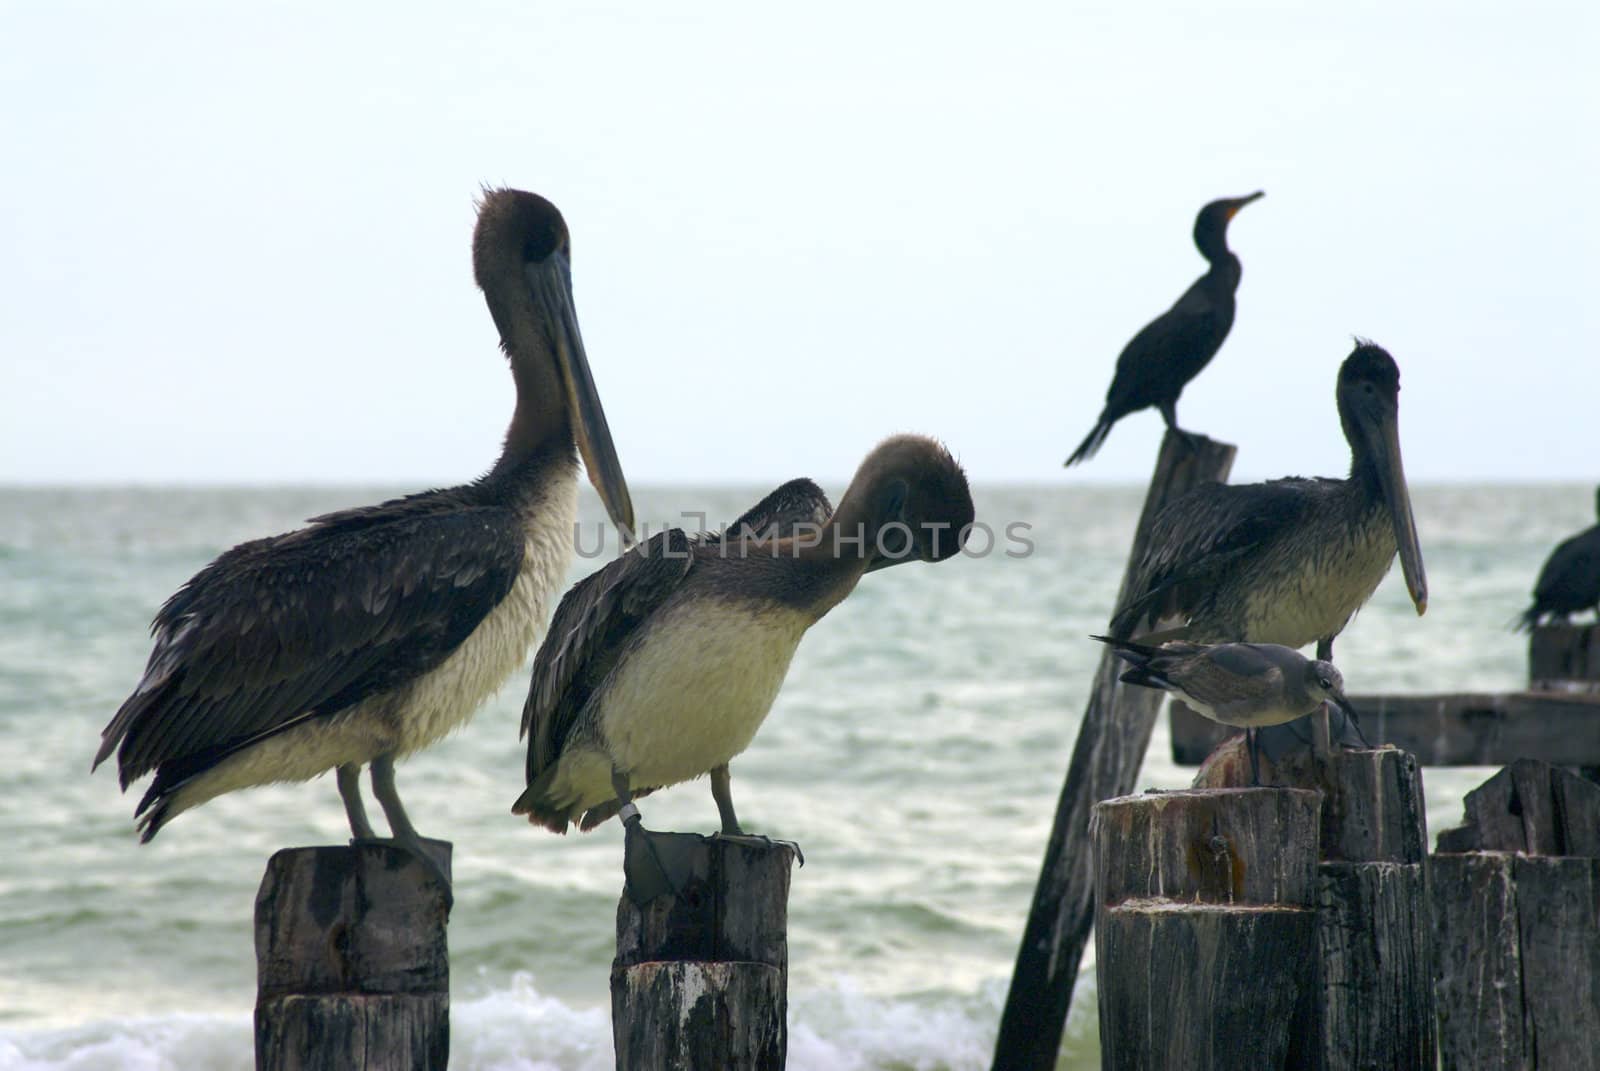 A group of pelicans and seabirds sit on old pier pilings